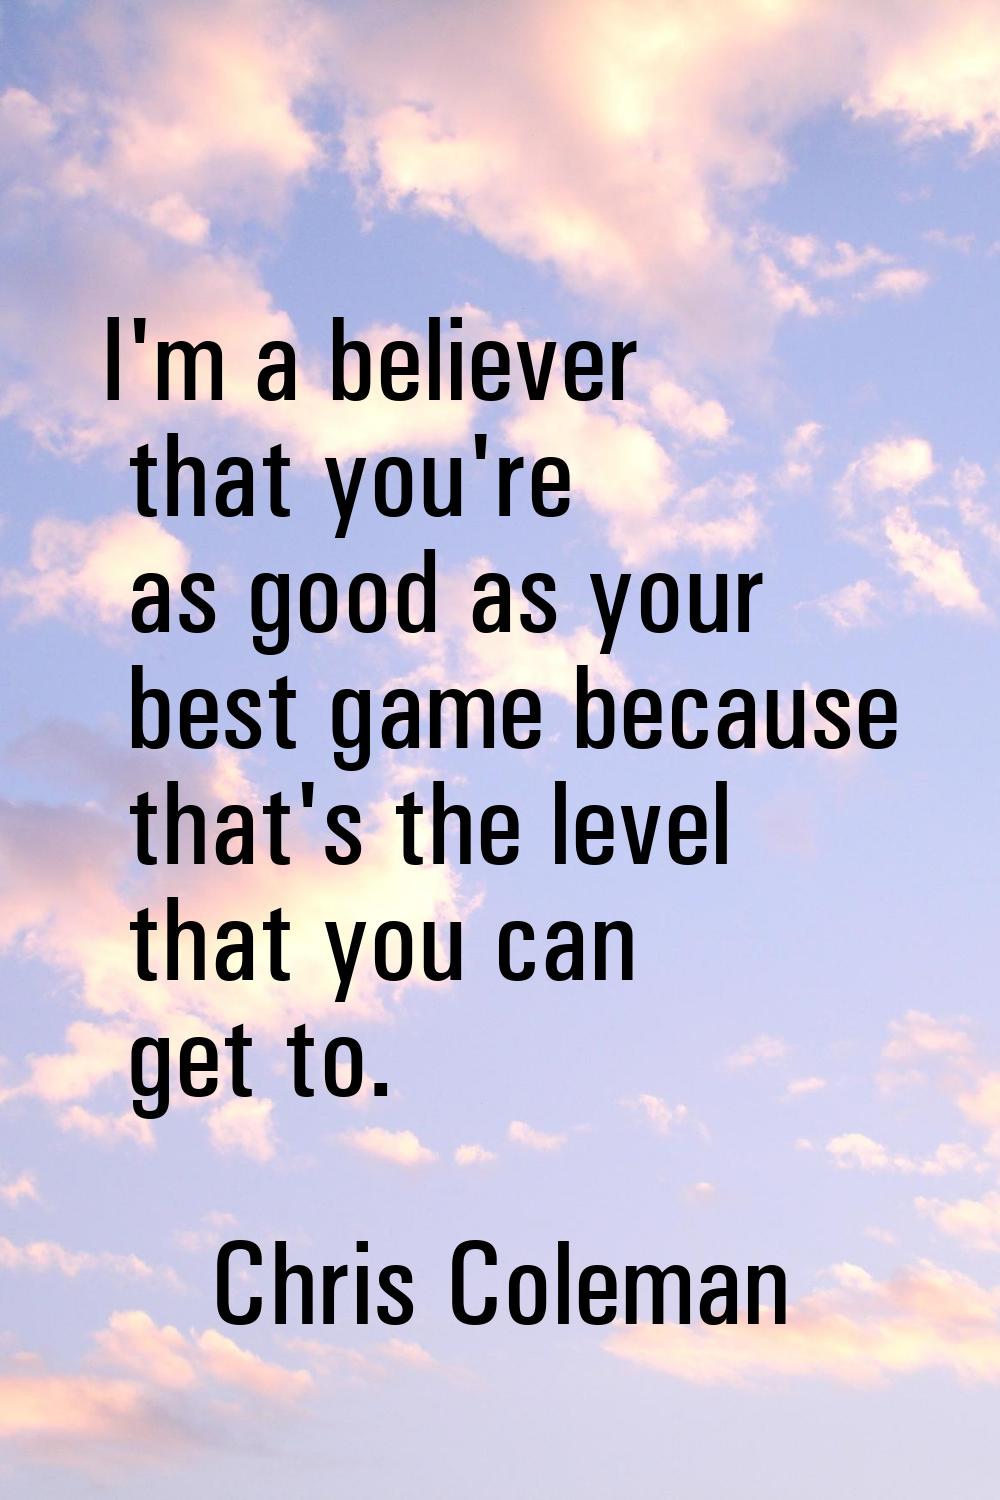 I'm a believer that you're as good as your best game because that's the level that you can get to.